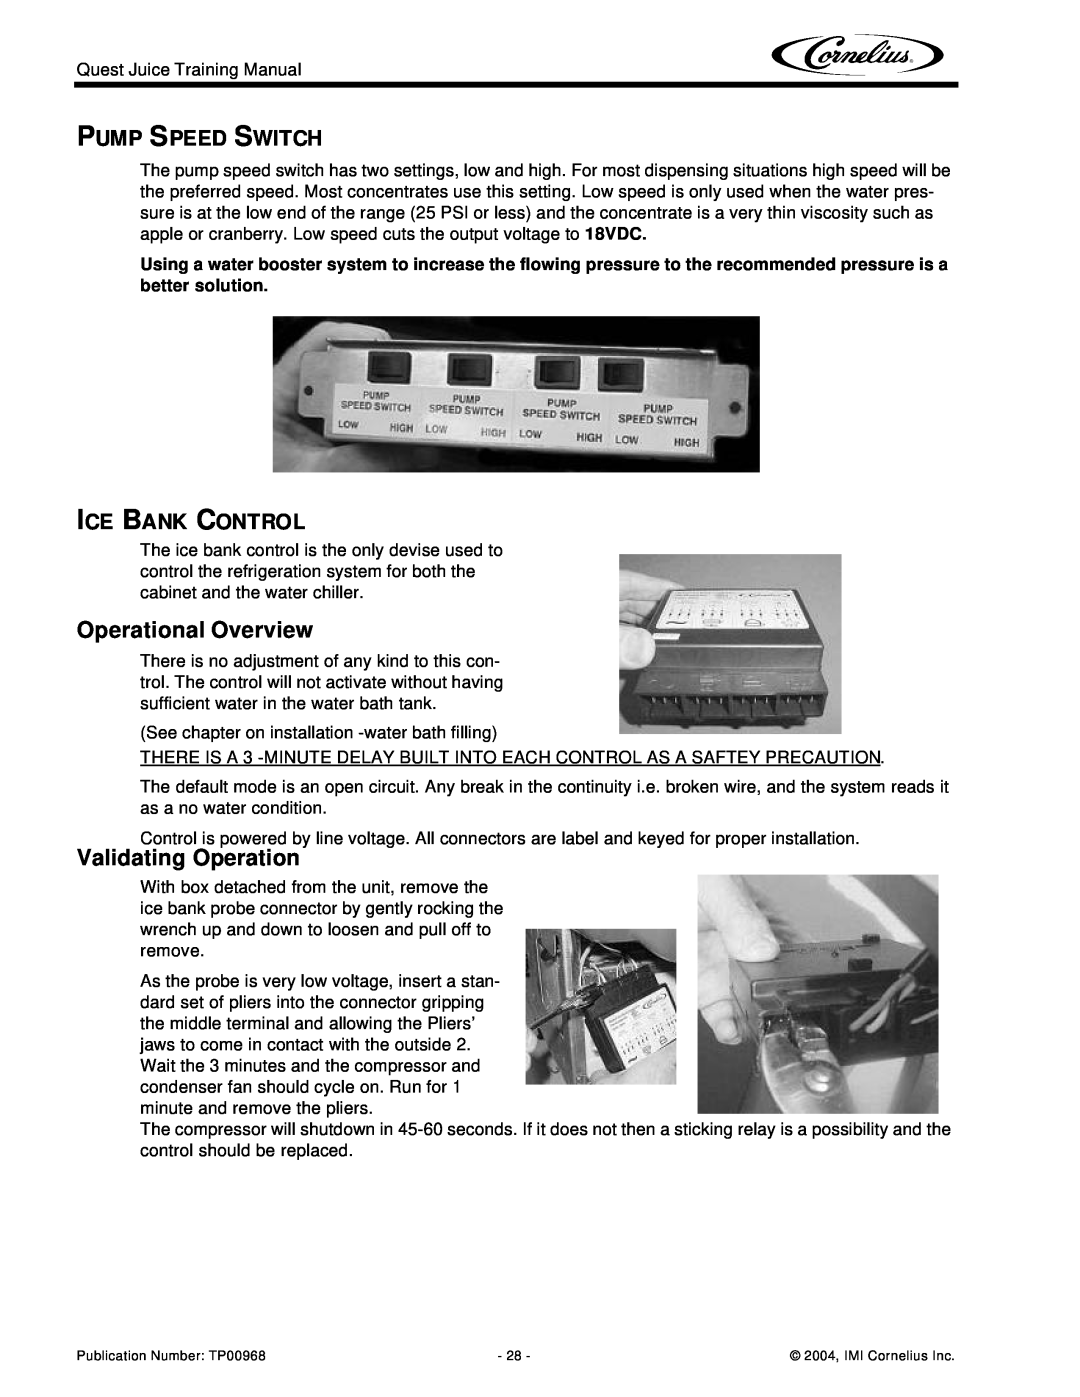 Cornelius 4 Flavor, 2 Flavor manual Operational Overview, Validating Operation, Pump Speed Switch, Ice Bank Control 